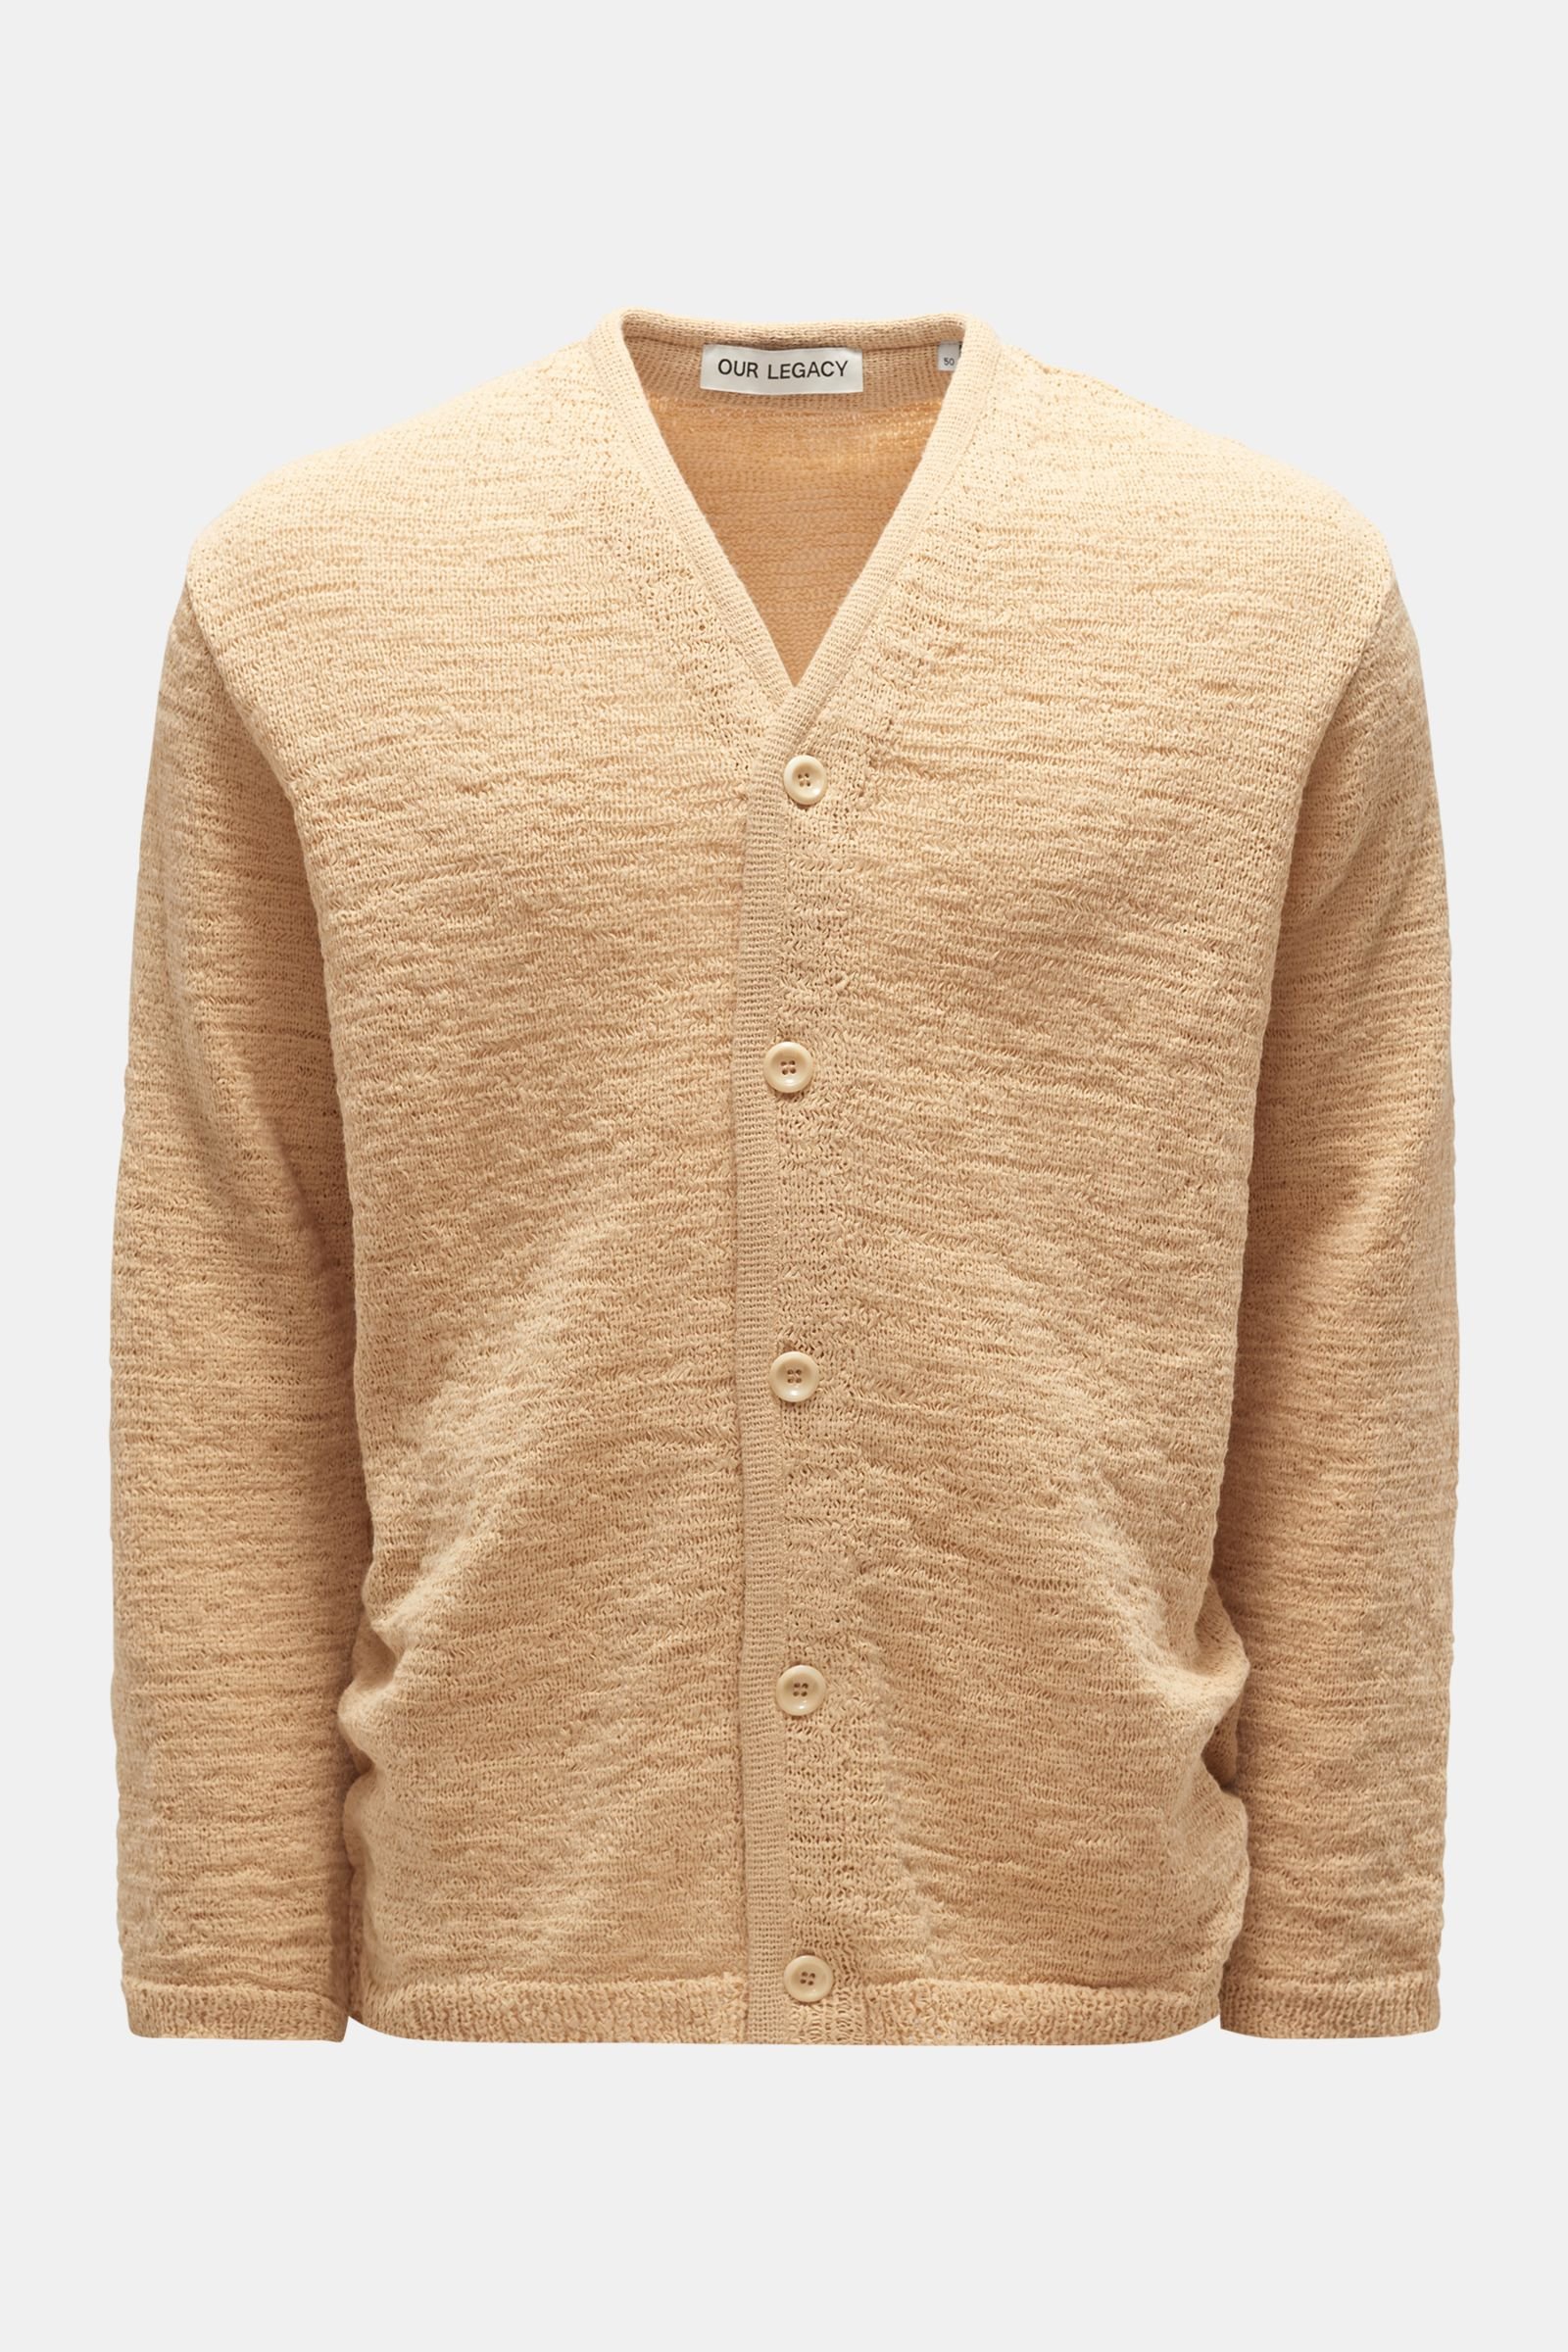 our legacy KNITTED CARDIGAN-